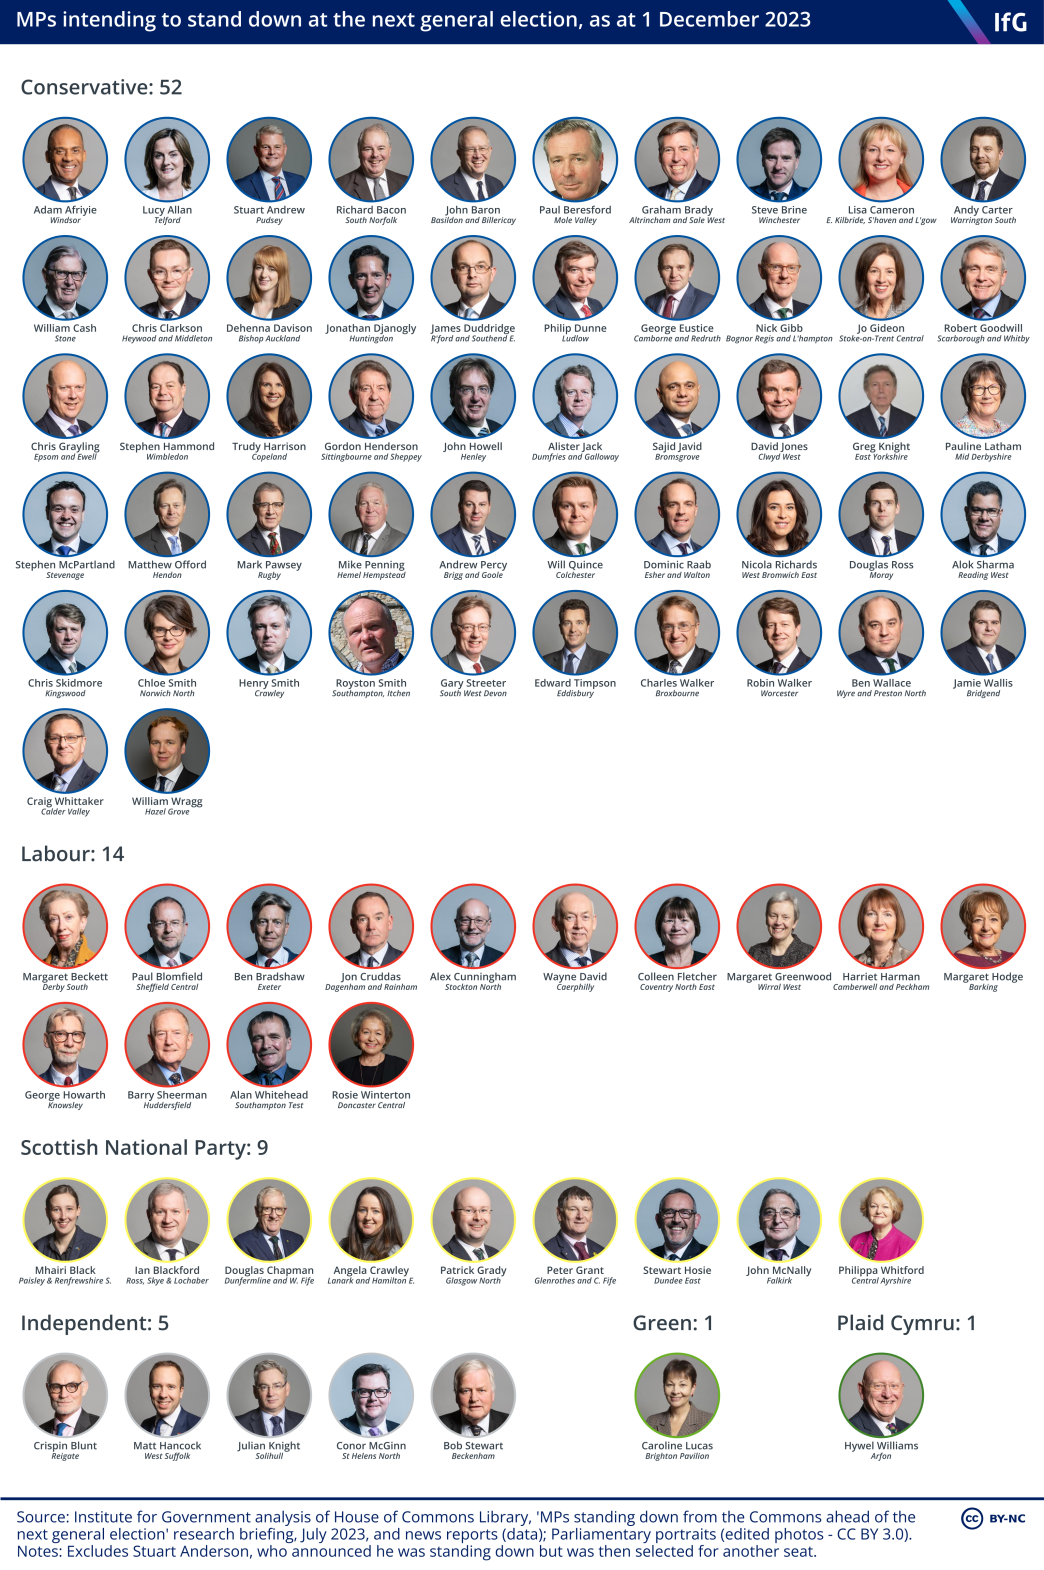 An Institute for Government graphic showing MPs intending to stand down at the next general election, as at 1 December 2023, where there are 82 MPs standing down in total, including 52 Conservative and 14 Labour MPs, and featuring people such as Dominic Raab, Matt Hancock and Ben Wallace.